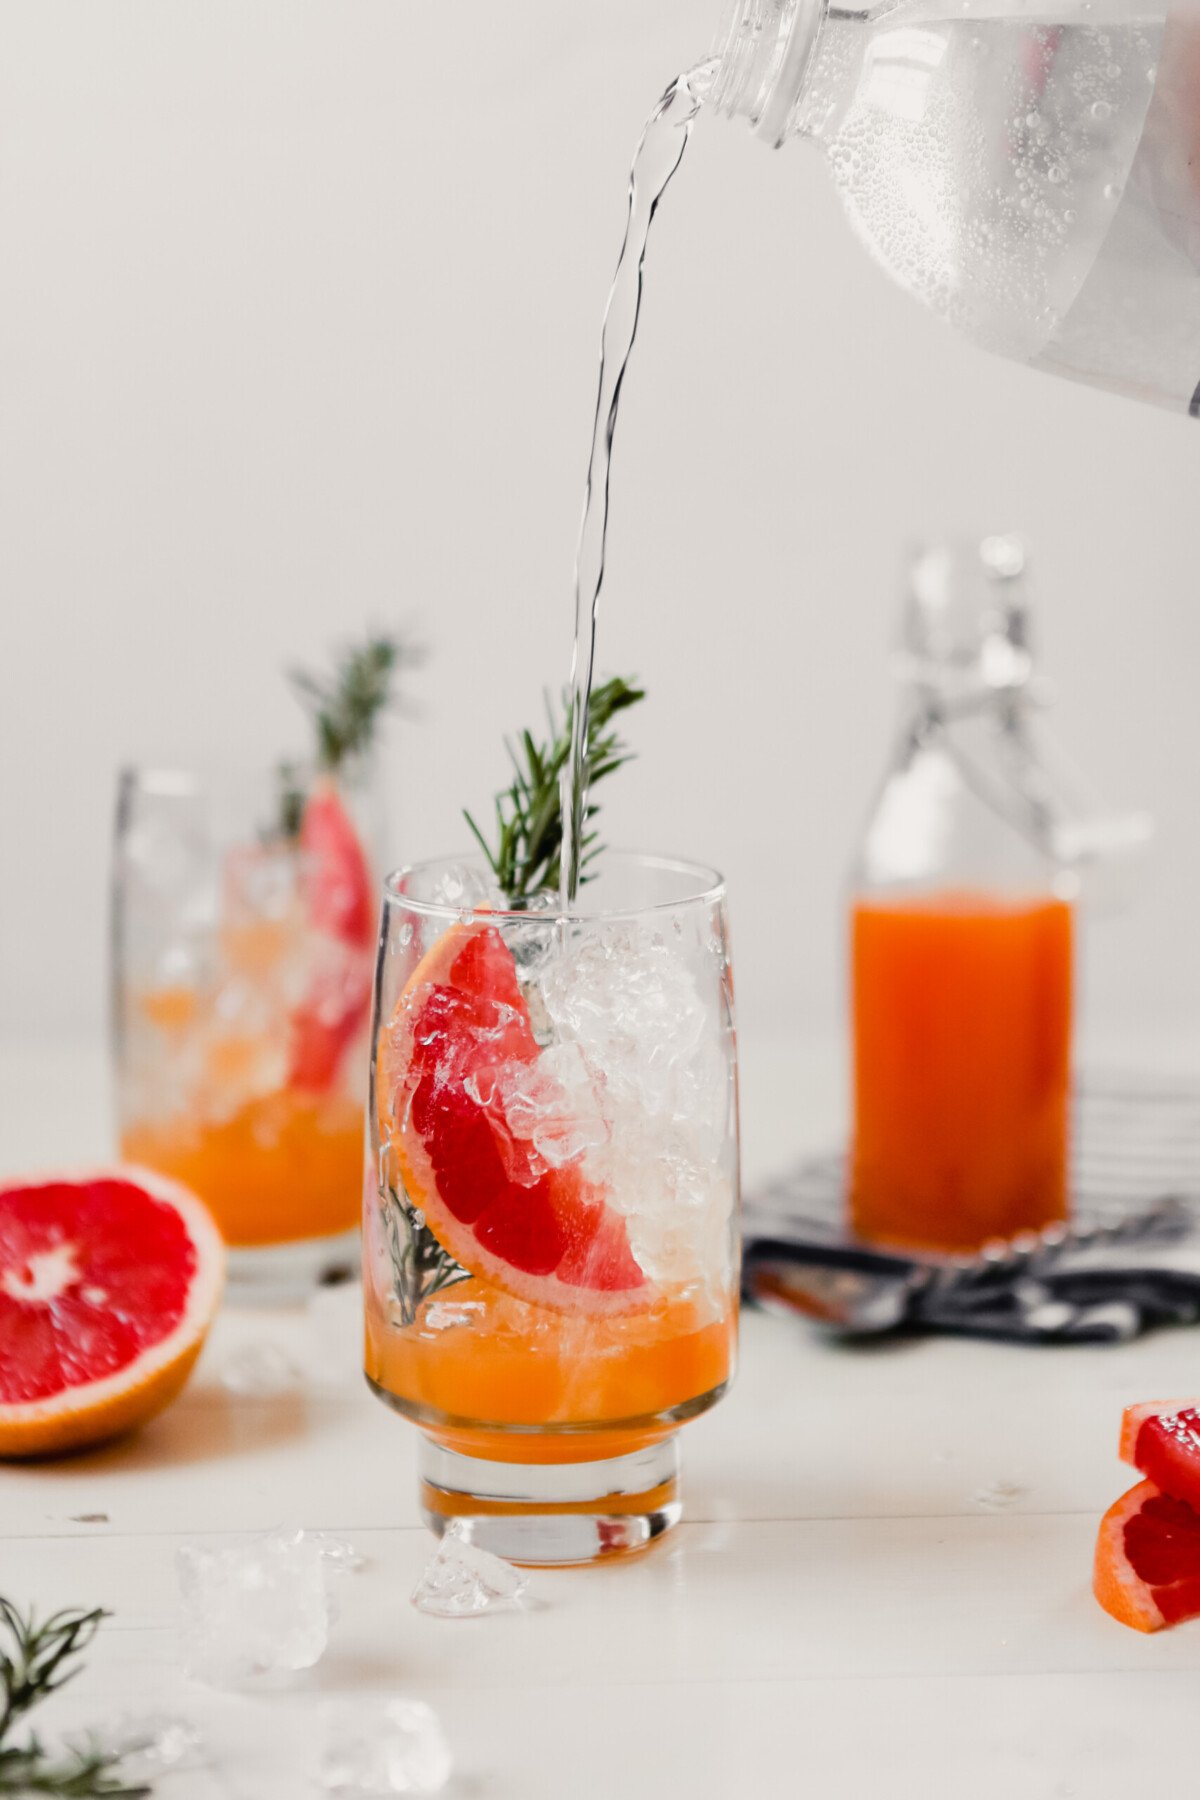 Photograph of club soda being pouring into .a glass with a grapefruit slice and sprig of rosemary to make a grapefruit soda.